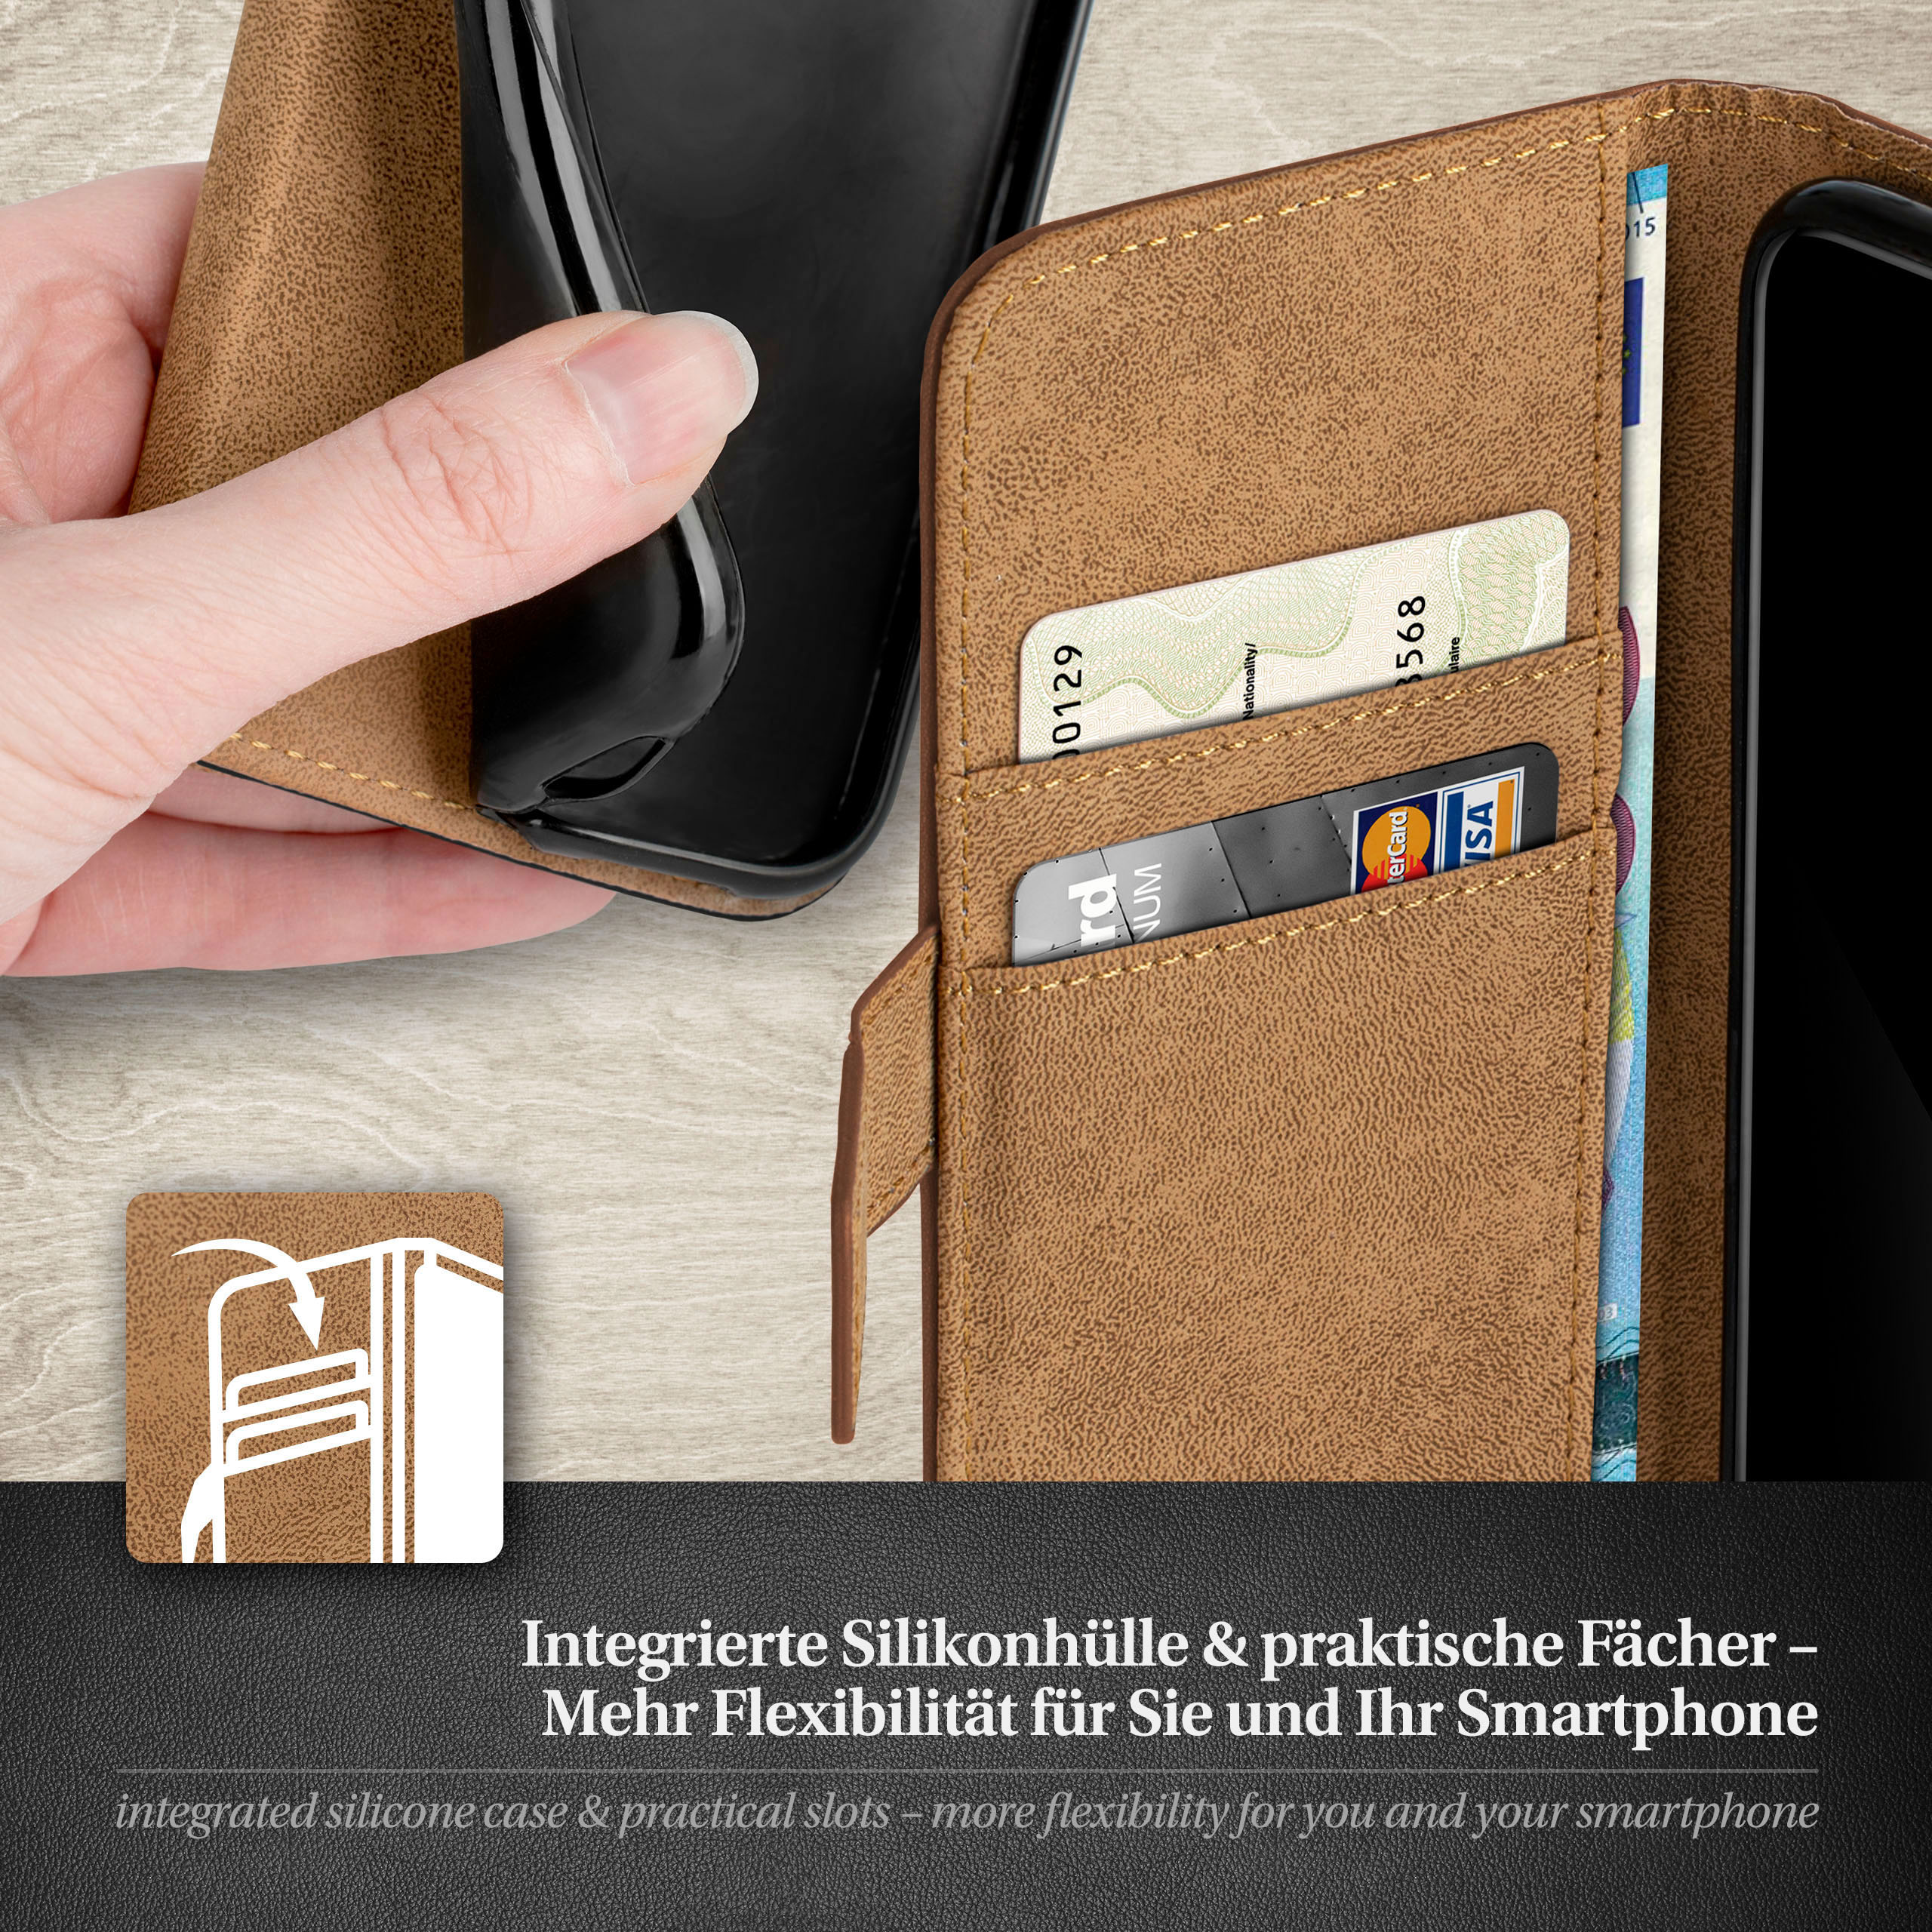 MOEX Book S3 Neo, Umber-Brown Bookcover, / Galaxy Case, S3 Samsung,